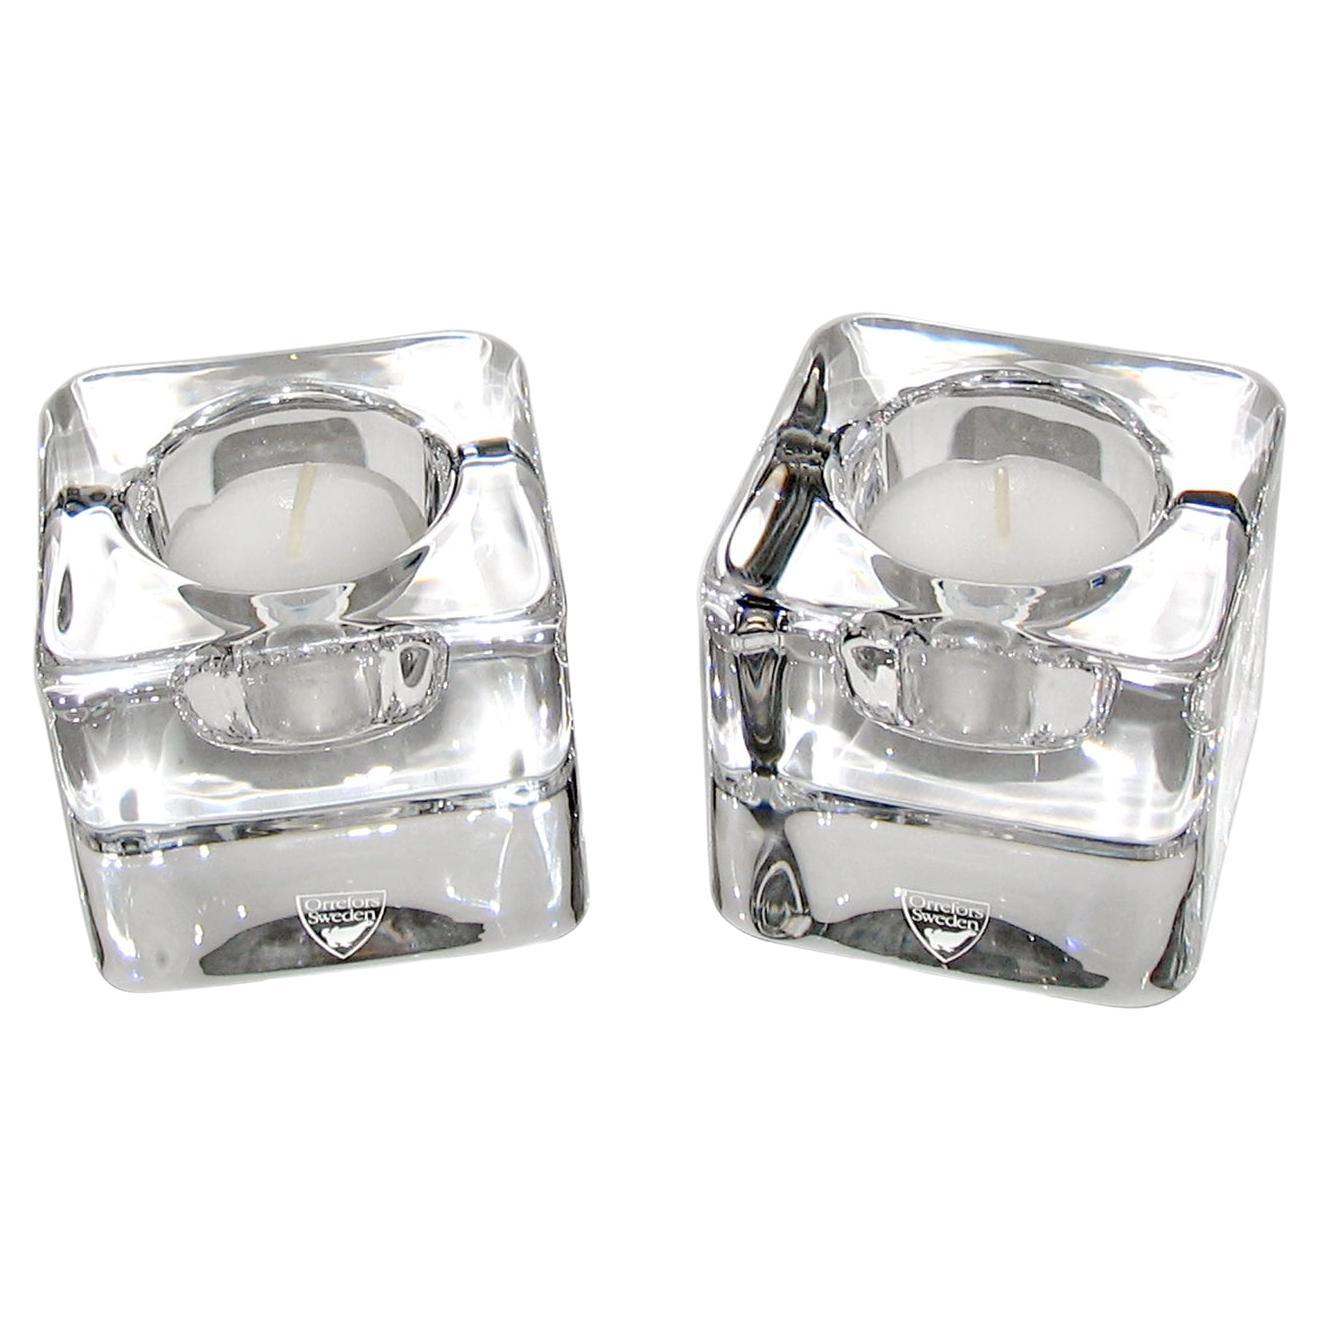 Crystal Votive Candle Holders by Goran Wärff for Orrefors, Mid-Century Modern